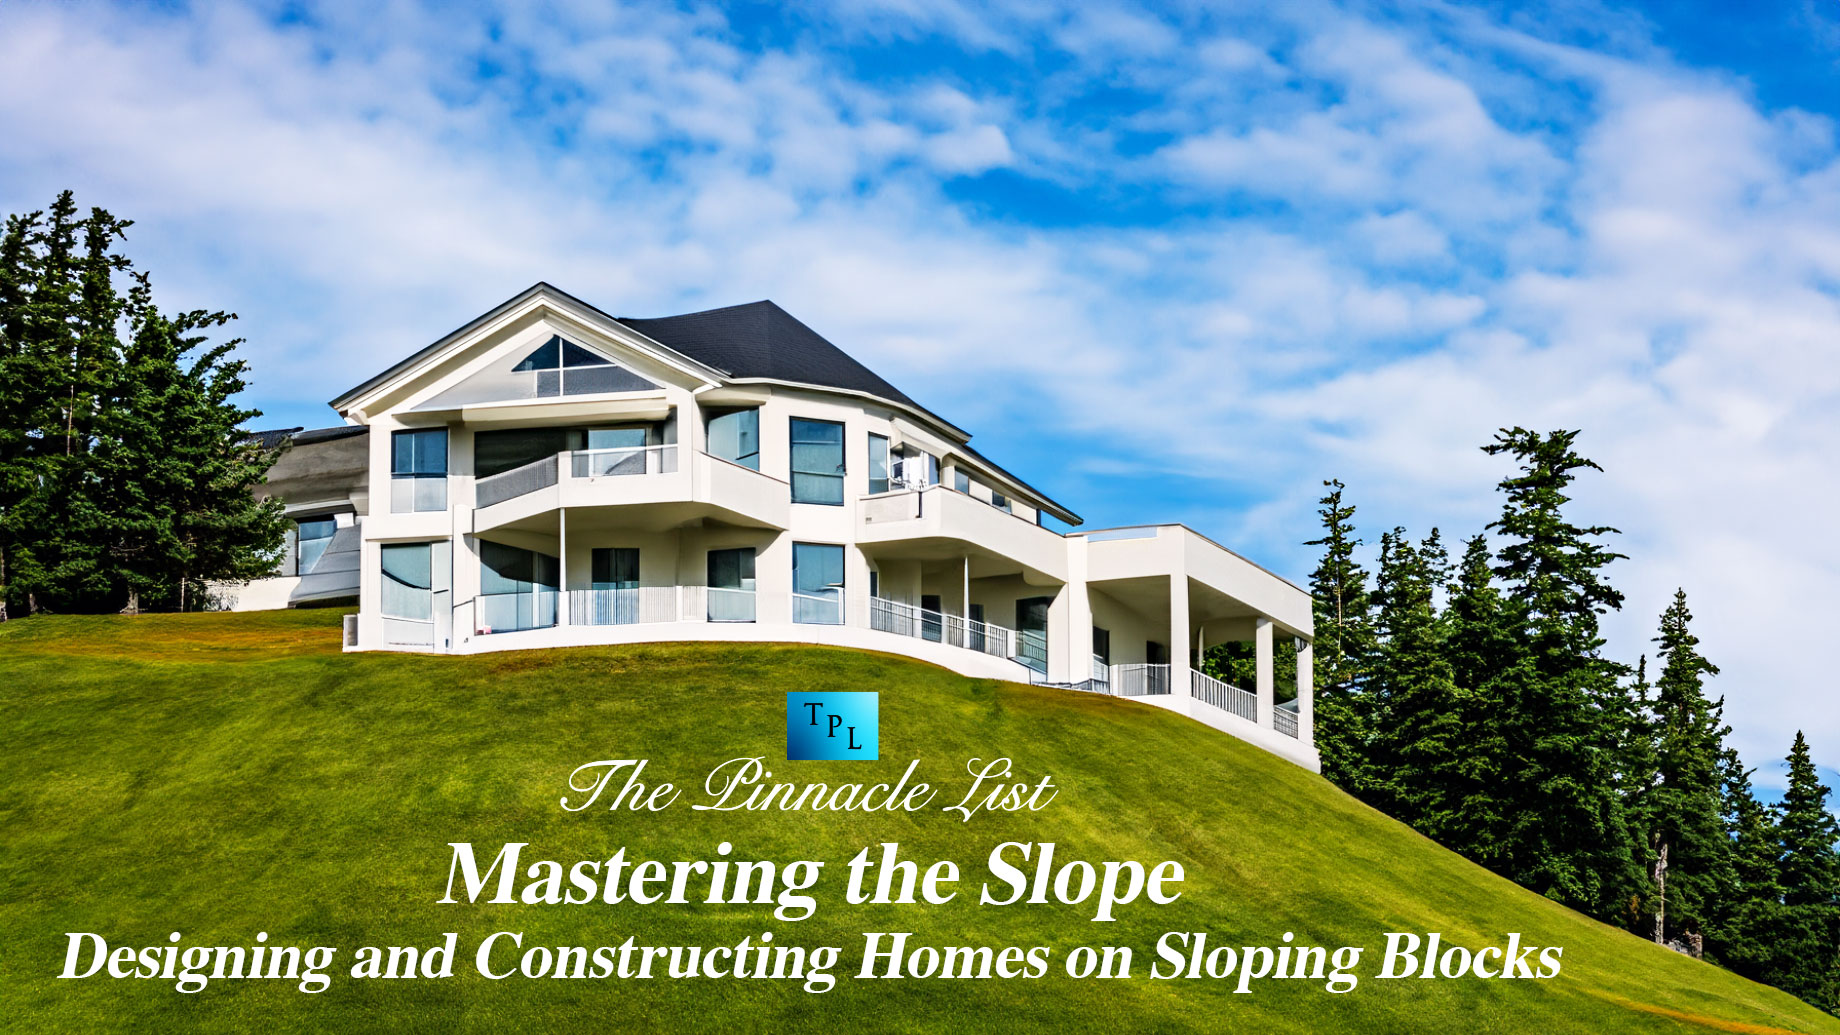 Mastering The Slope: Designing And Constructing Homes On Sloping Blocks